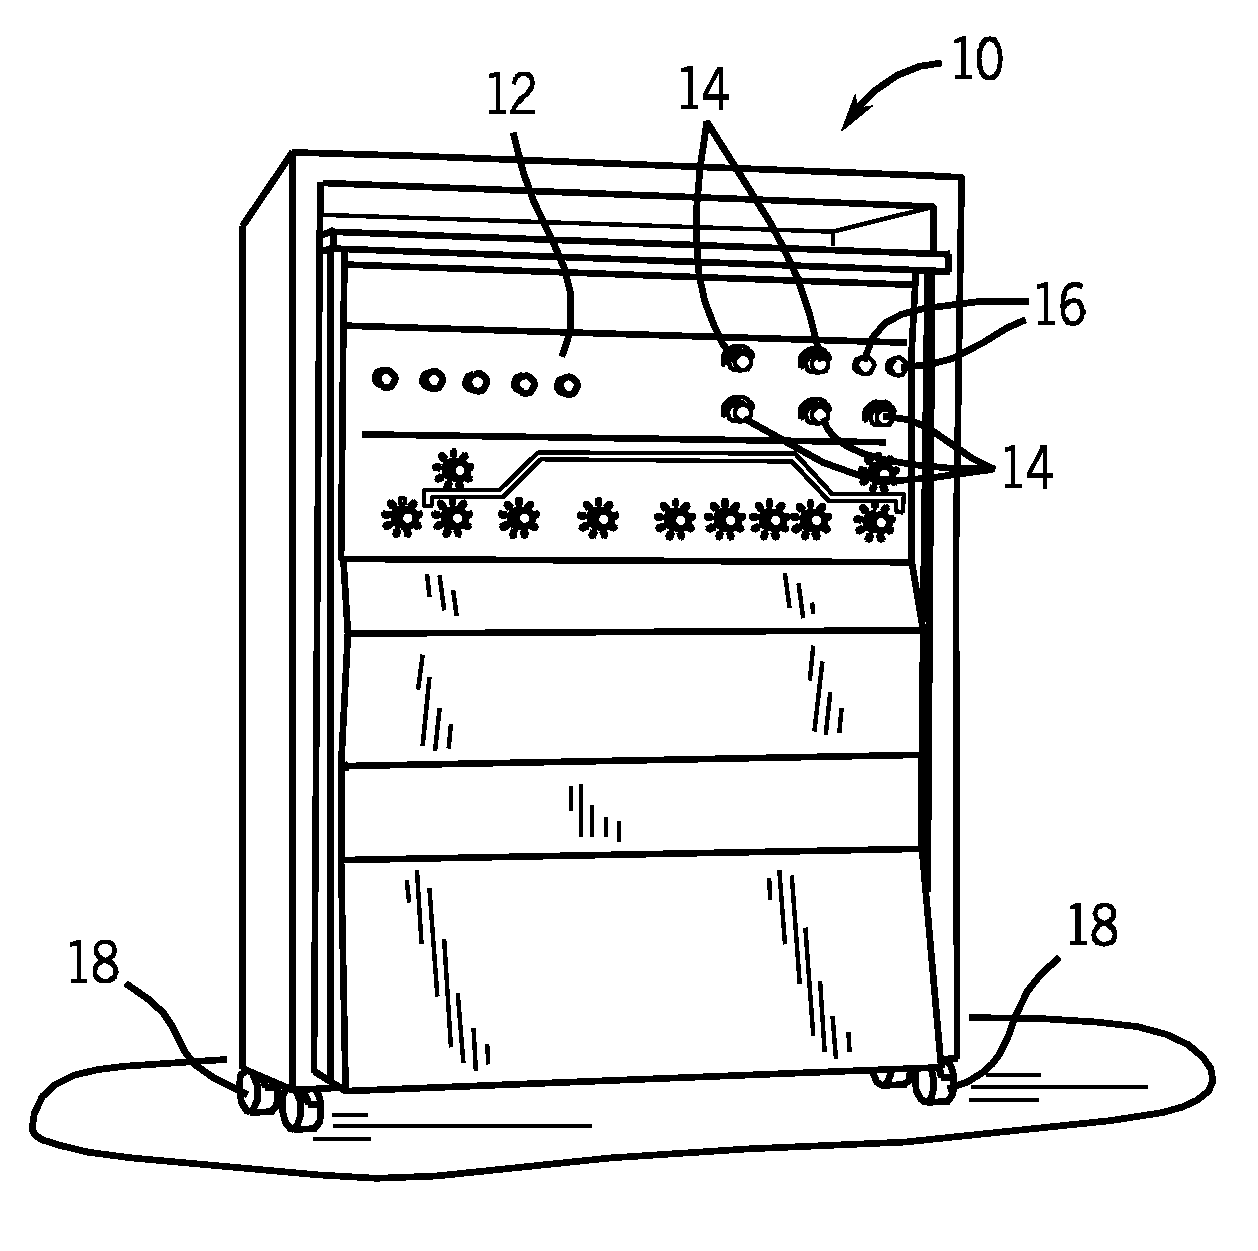 System and methods for efficient provision of arc welding power source